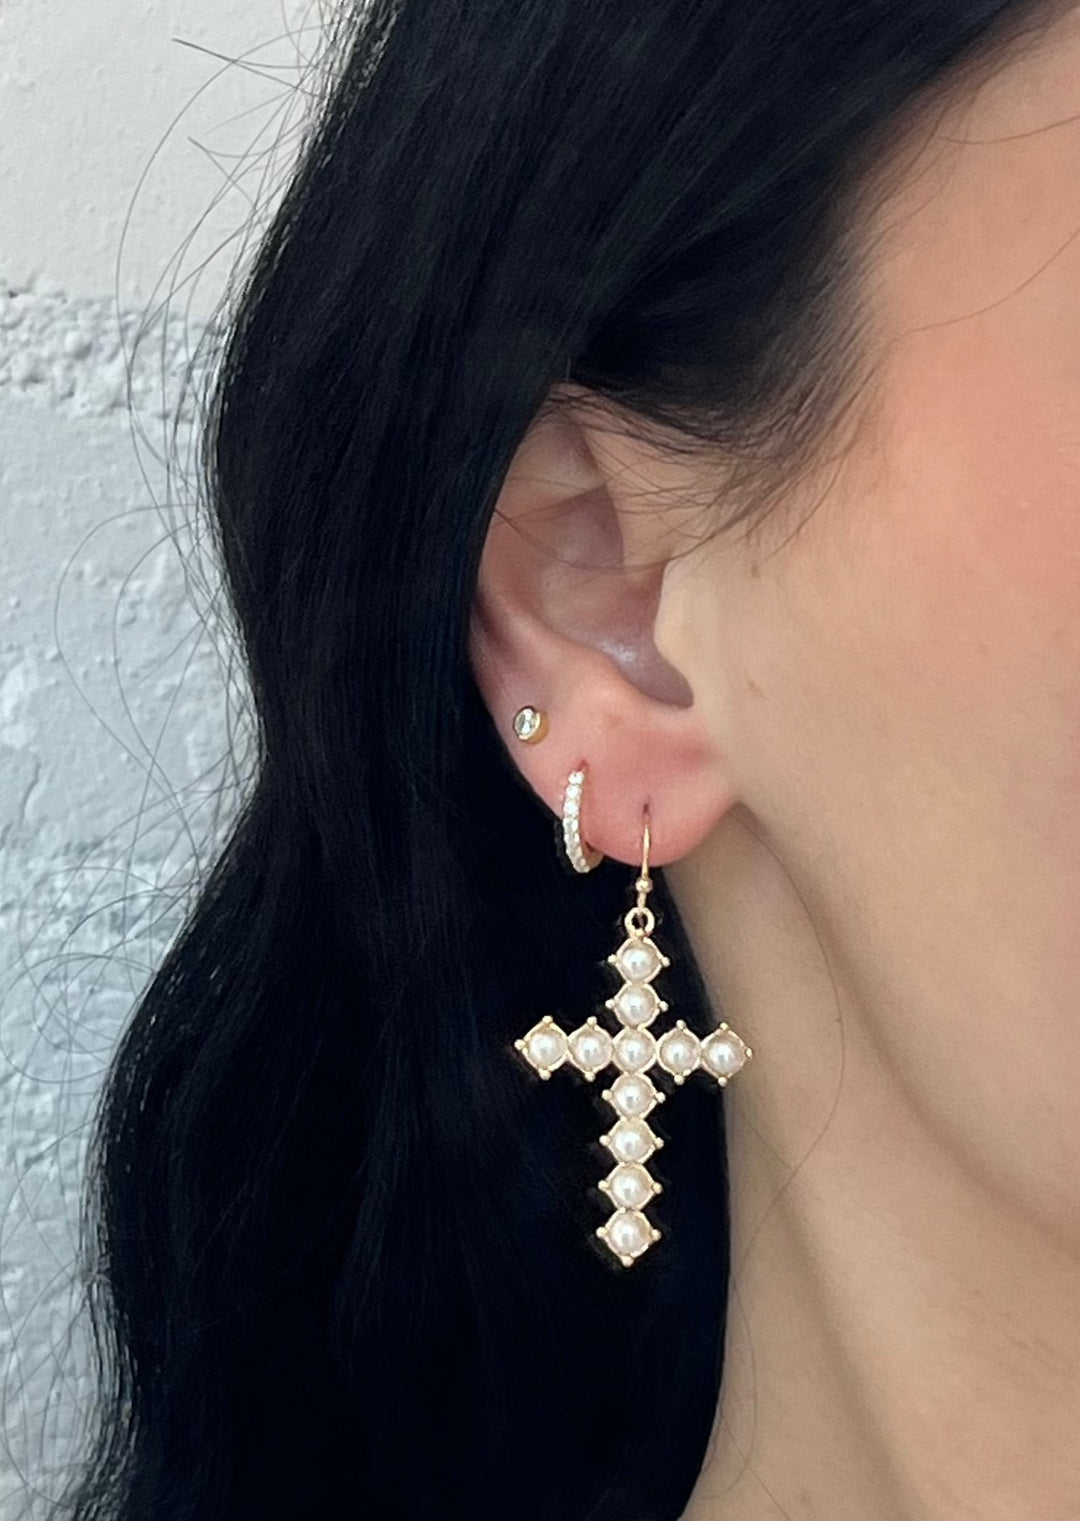 Pearl Cross Earring, Jewelry, Adeline, Adeline, dallas boutique, dallas texas, texas boutique, women's boutique dallas, adeline boutique, dallas boutique, trendy boutique, affordable boutique